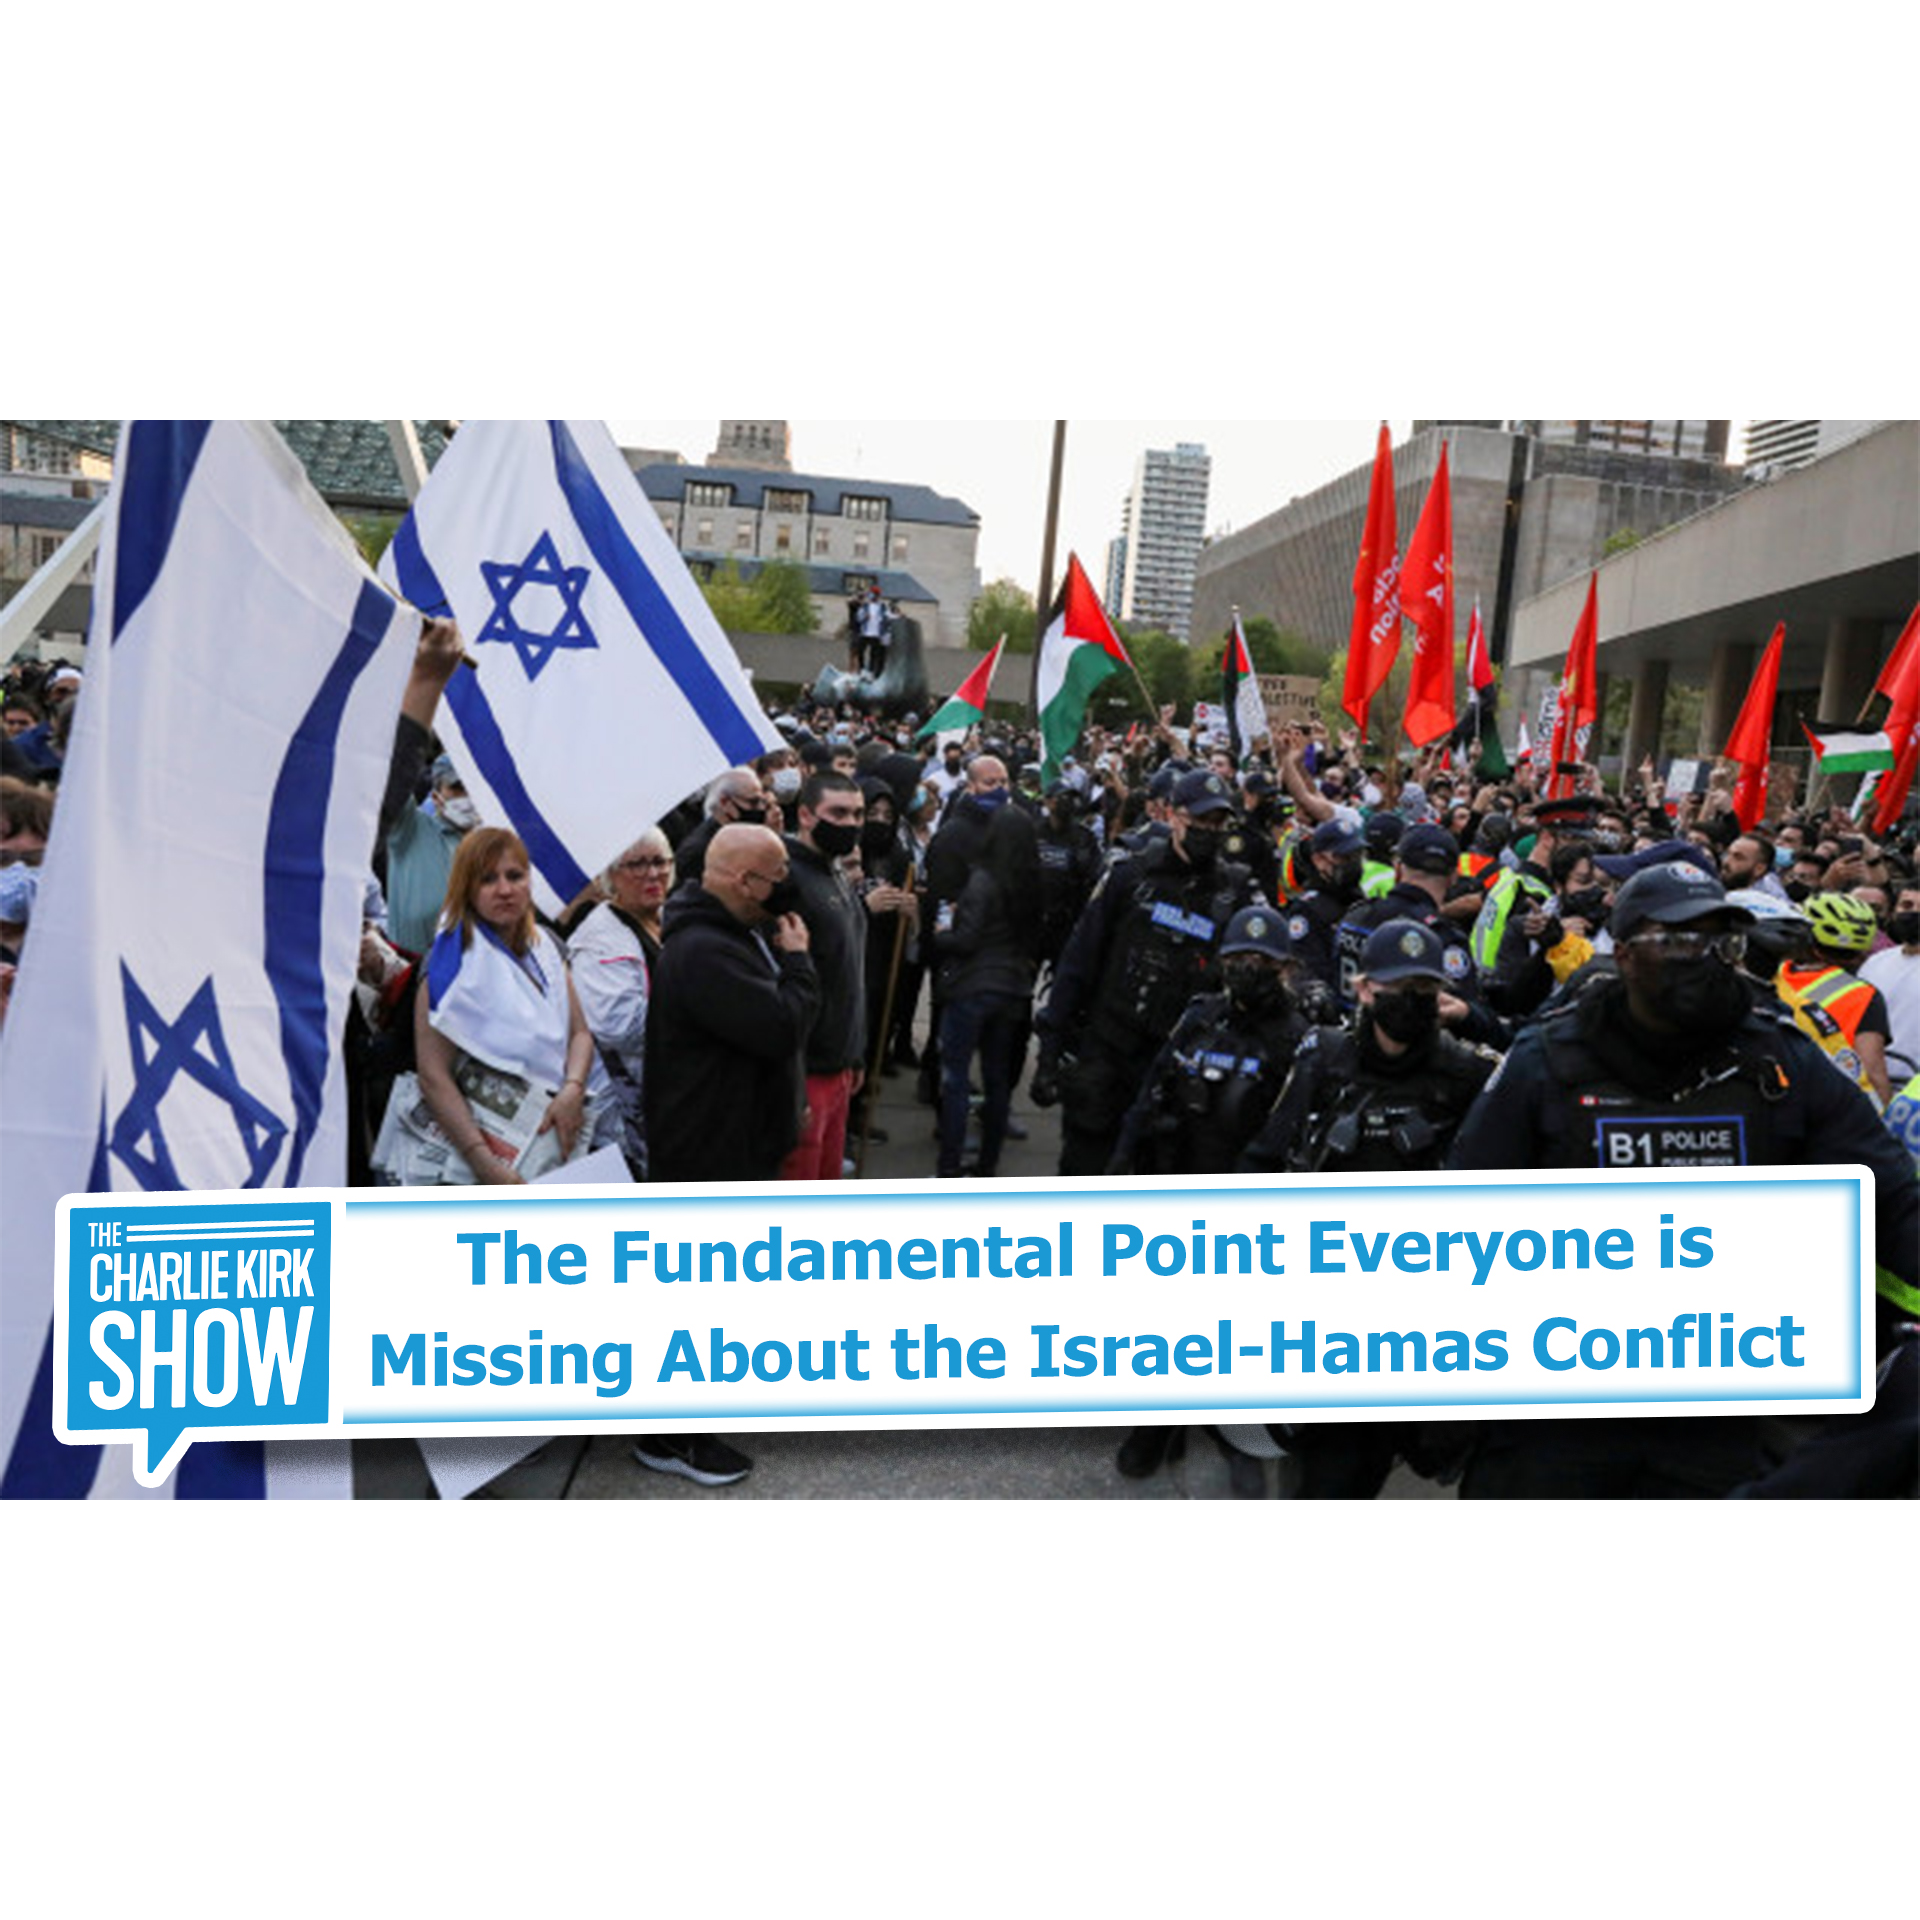 The Fundamental Point Everyone is Missing About the Israel-Hamas Conflict